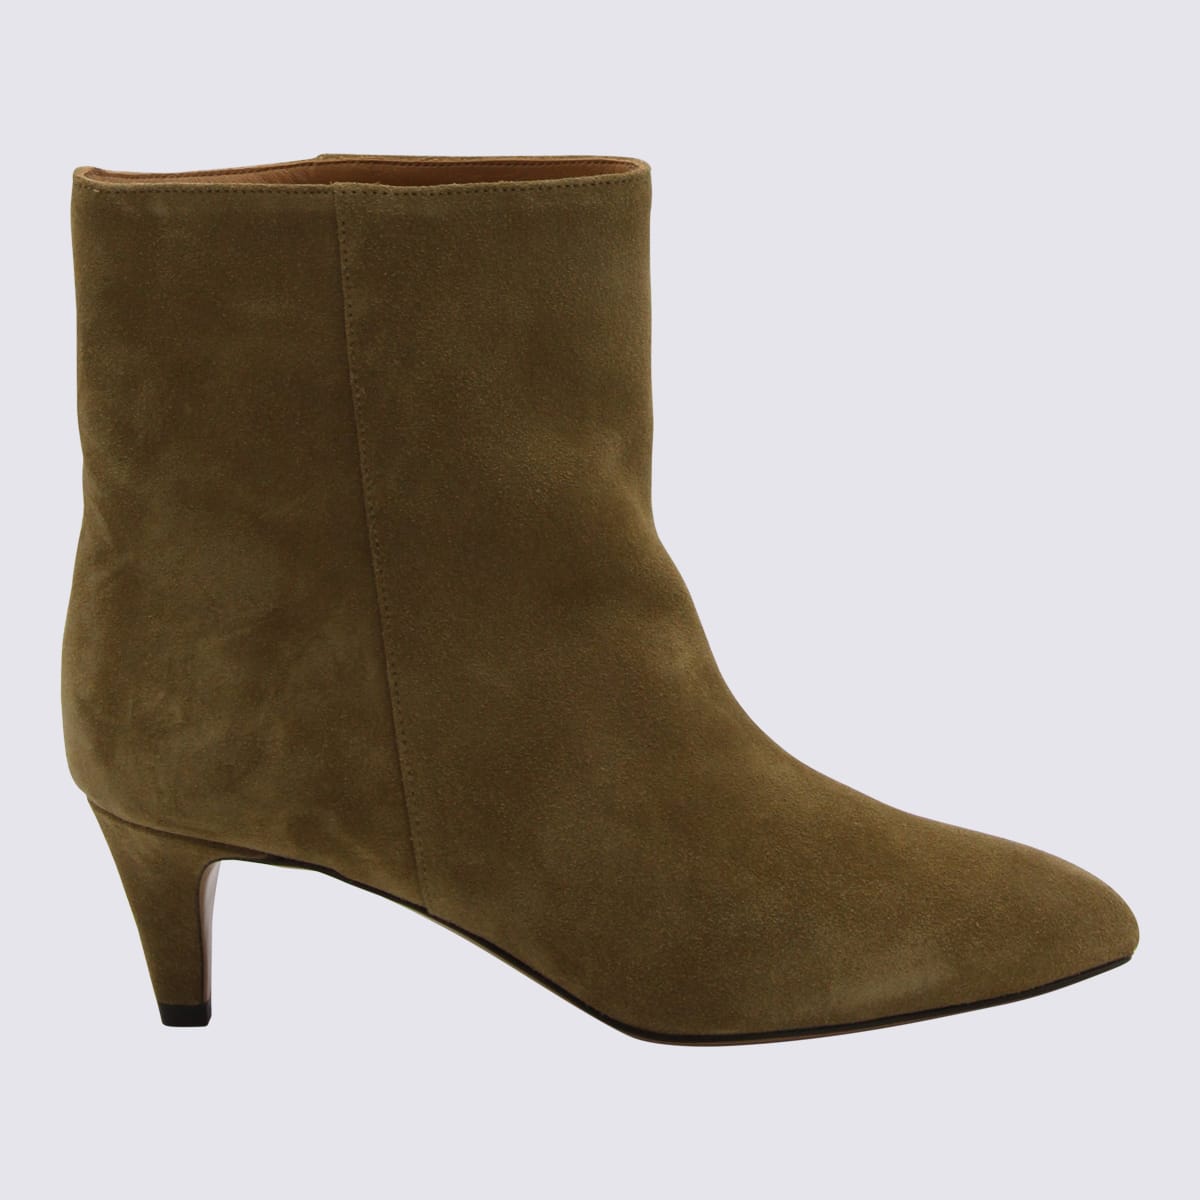 ISABEL MARANT TAUPE SUEDE DAXI BOOTS